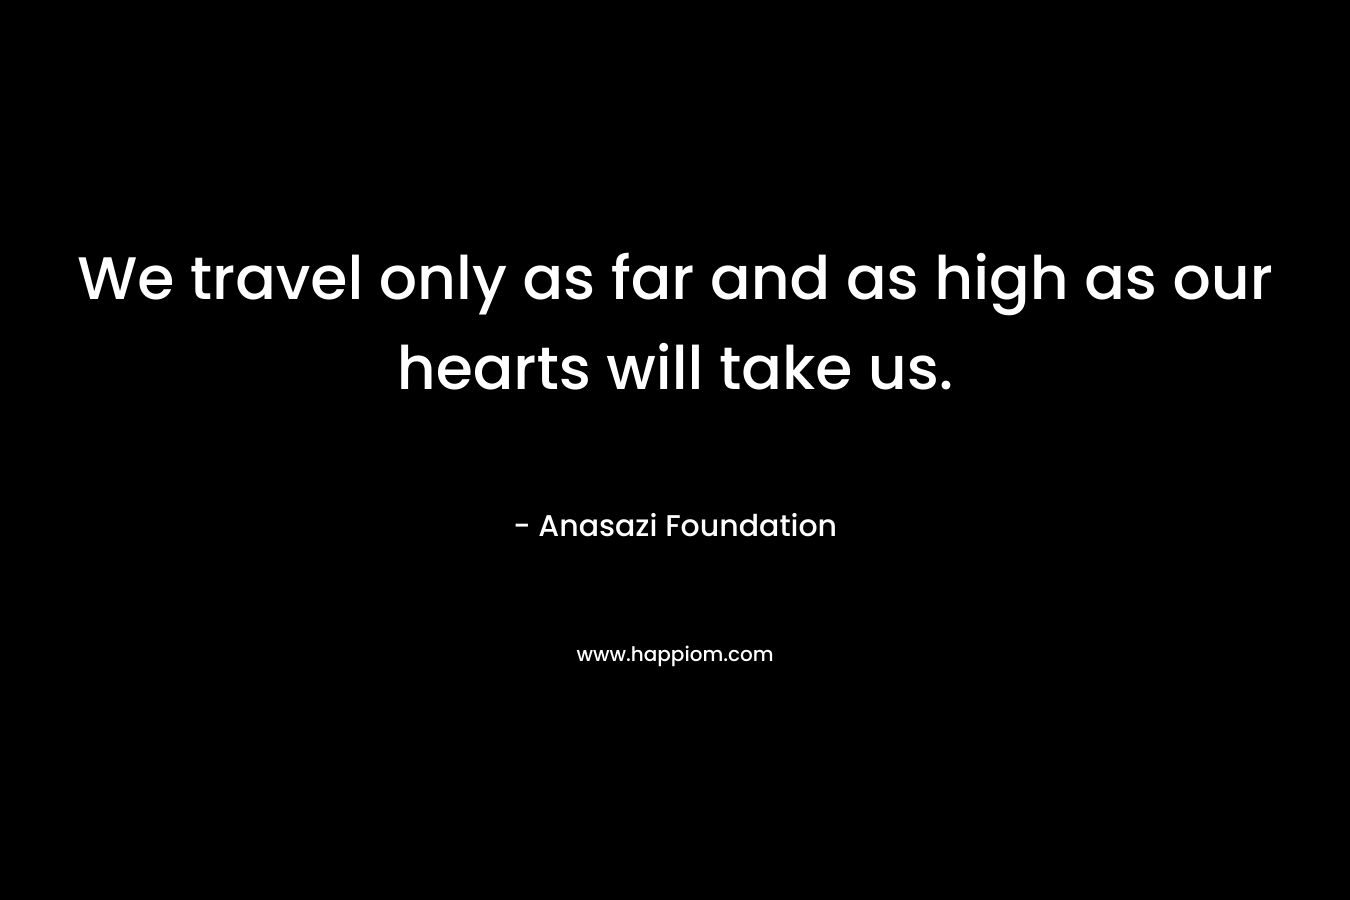 We travel only as far and as high as our hearts will take us. – Anasazi Foundation